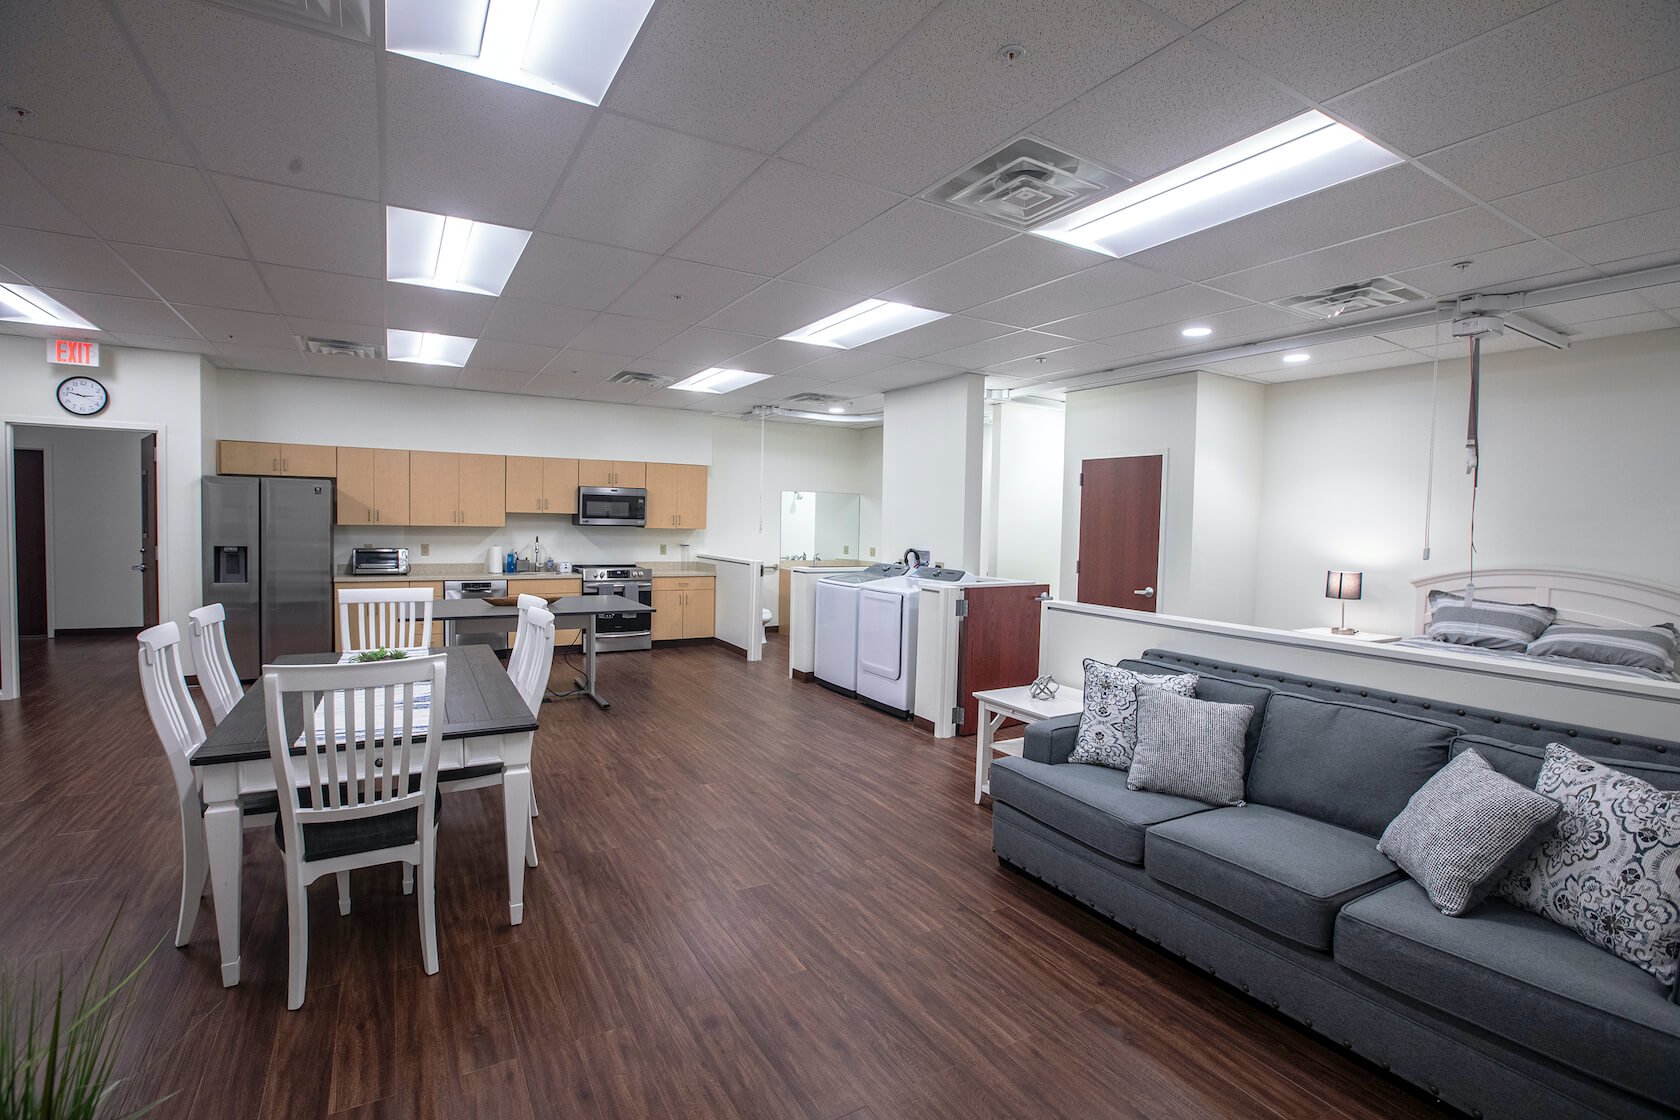 The Activities and Daily Living Lab provides an immersive apartment setting where students will practice working with patients to cook, bathe themselves, do laundry, and more.